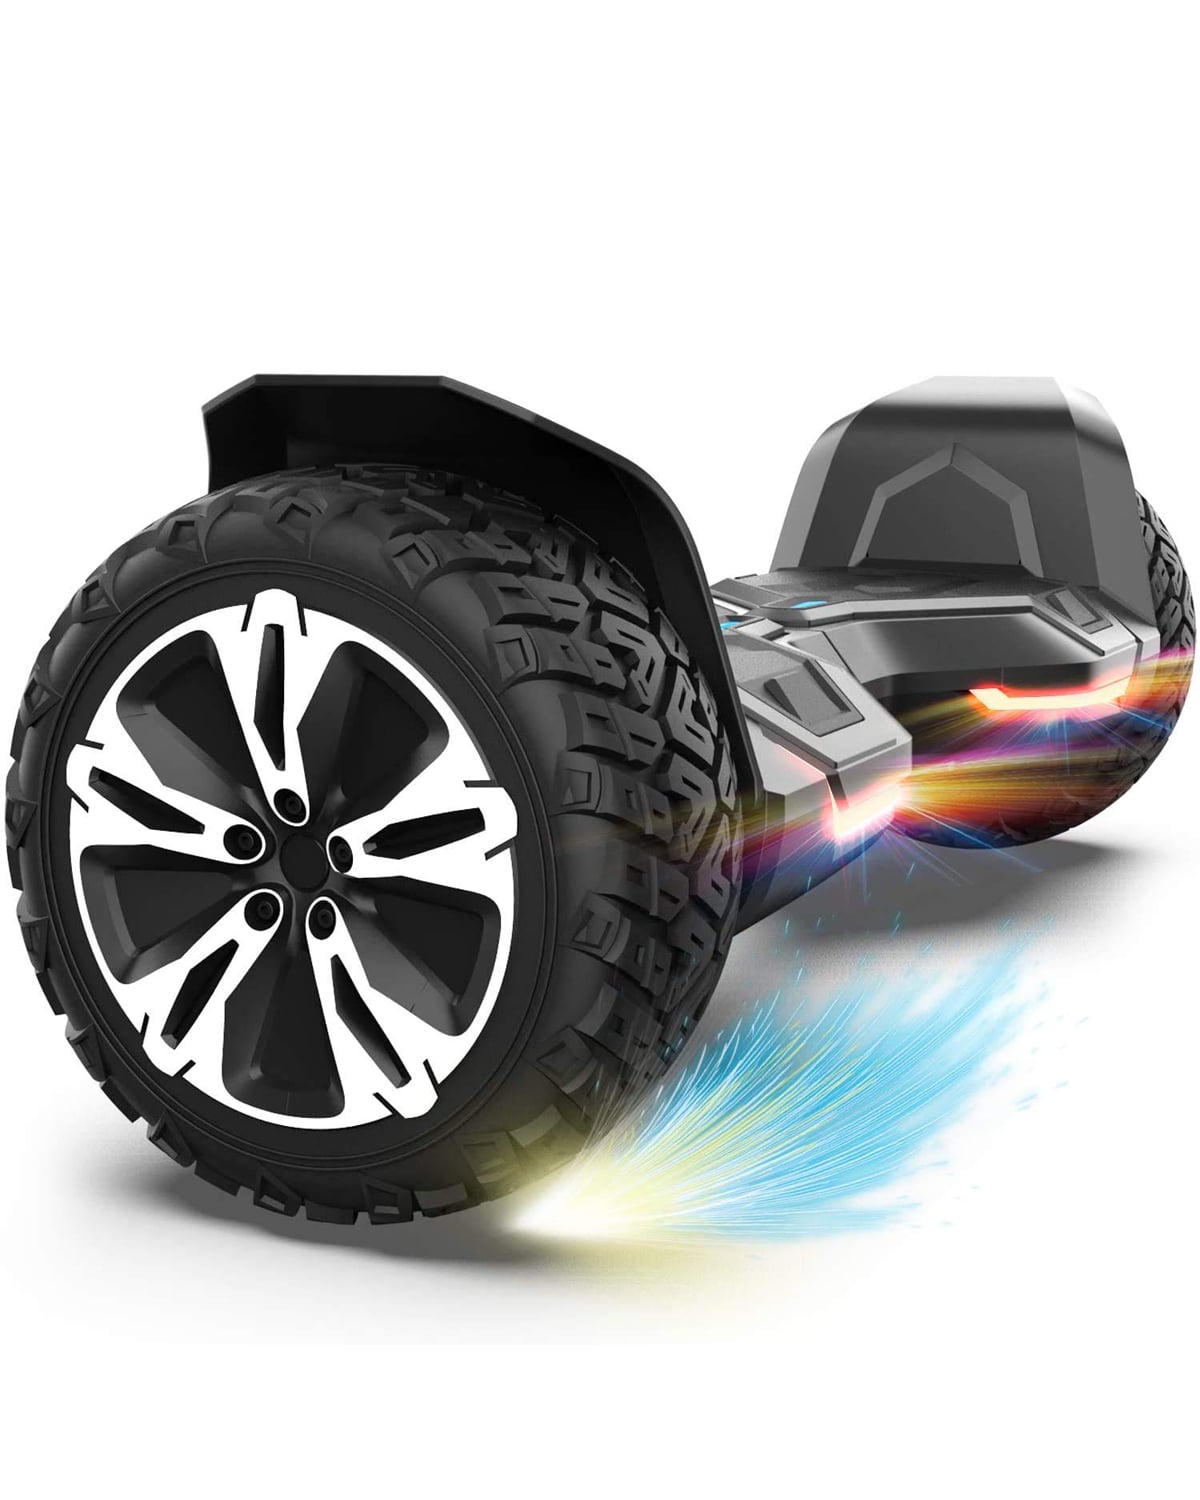 Gyroor Warrior hoverboard for kids and adults Black